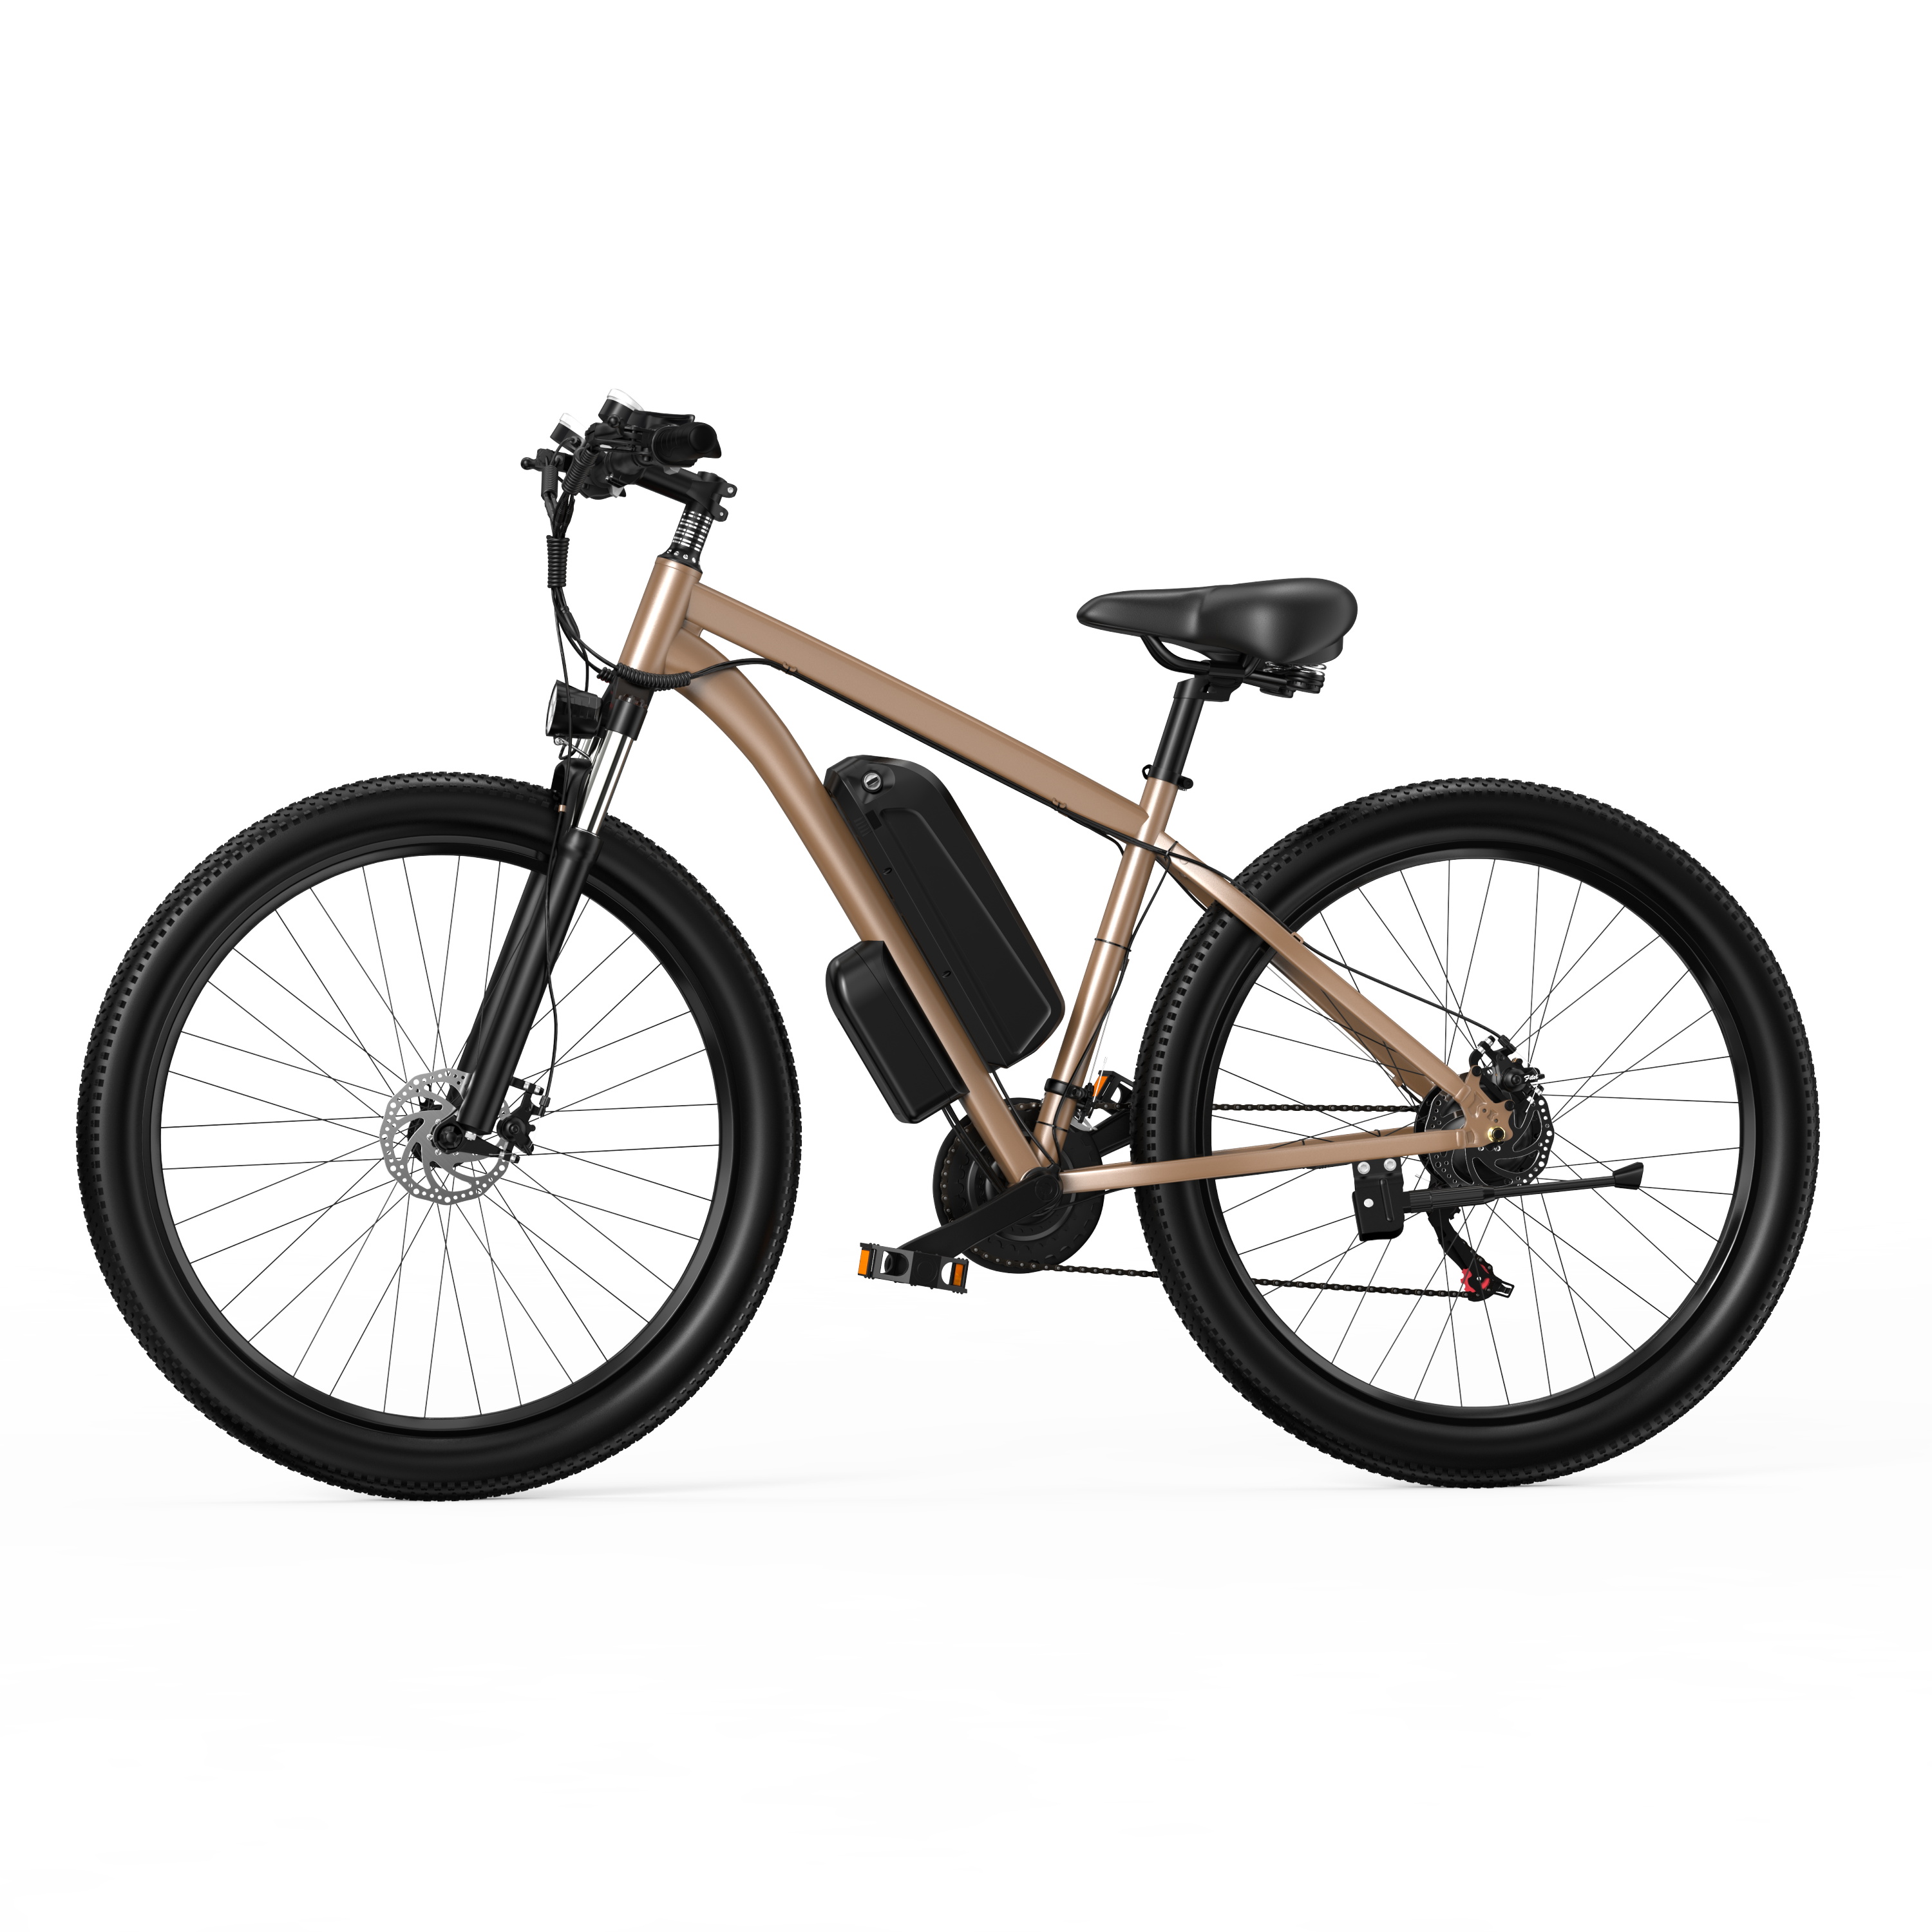 Find [EU DIRECT] X-TRON C29 13Ah 48V 500W Electric Bicycle 29inch 35-62km Mileage Range Max Load 150kg for Sale on Gipsybee.com with cryptocurrencies